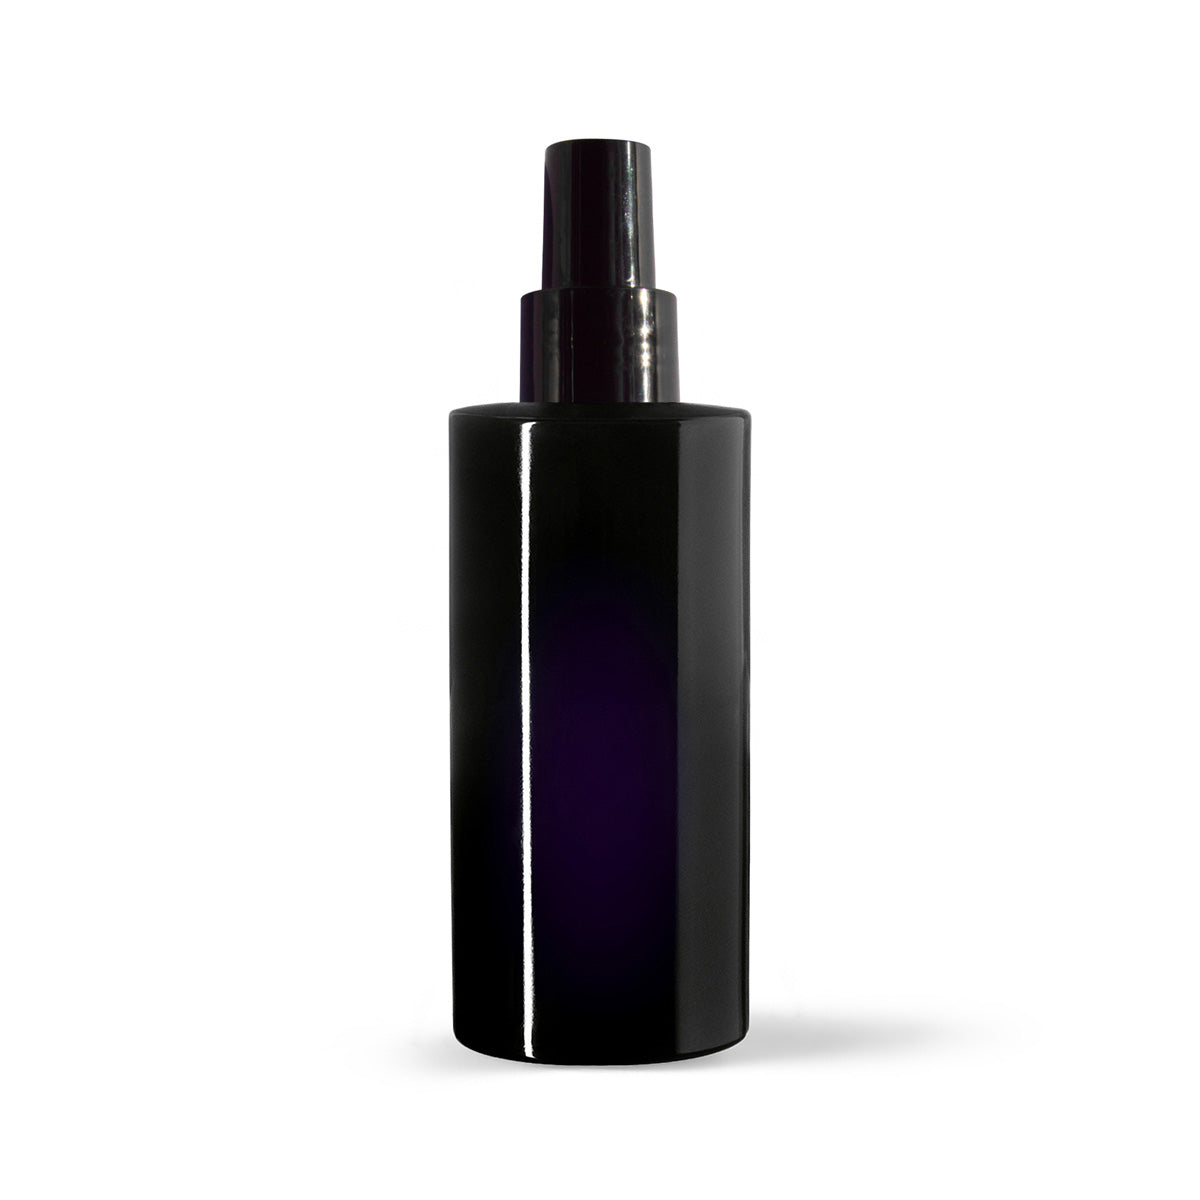 BOTTLE, VIOLET GLASS 200ML WITH SPRAY